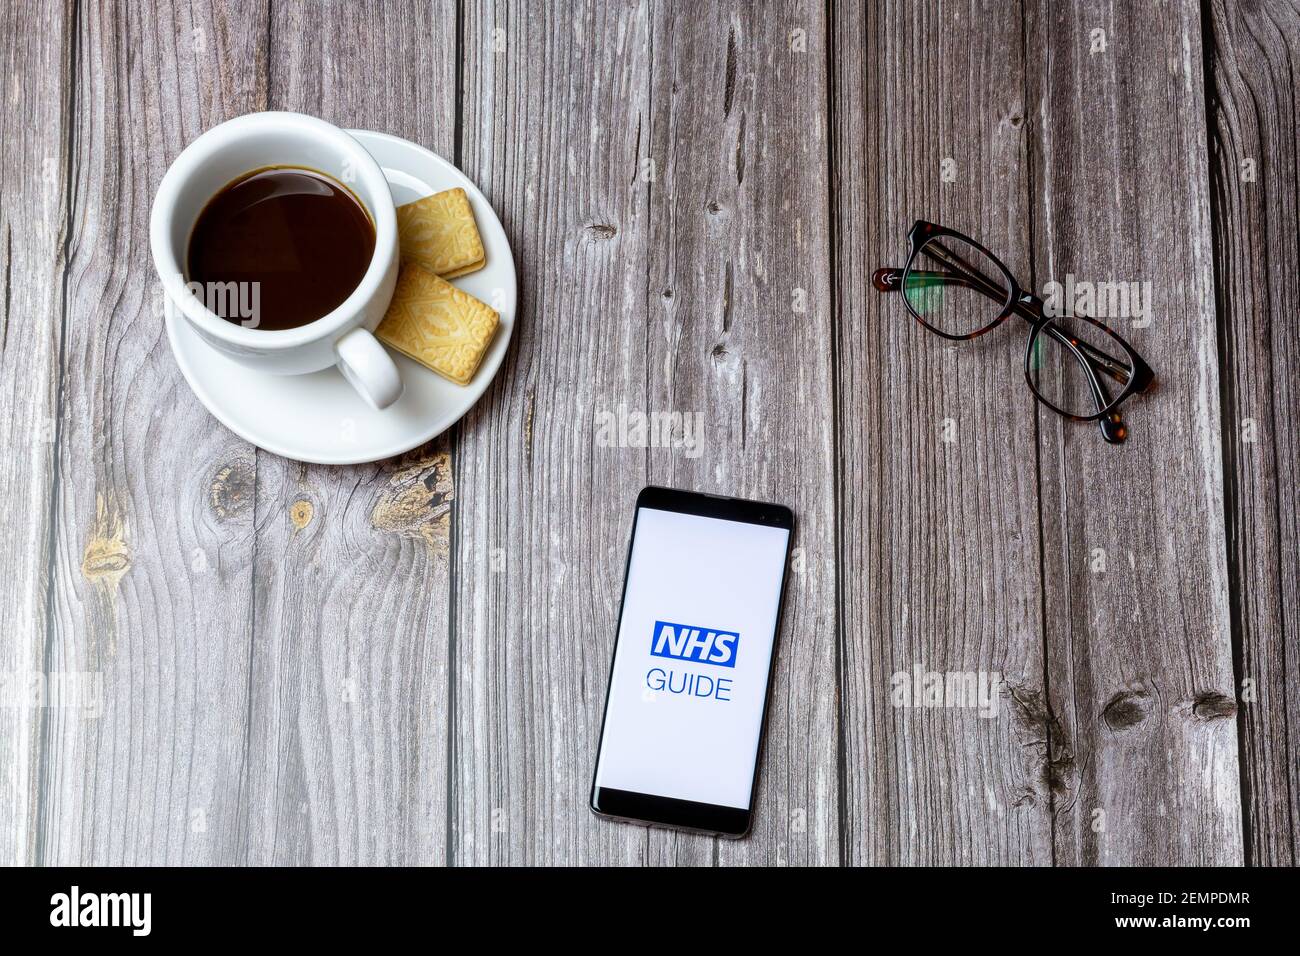 A mobile phone or cell phone on a wooden table with the NHS Guide app open next to a coffee and glasses Stock Photo